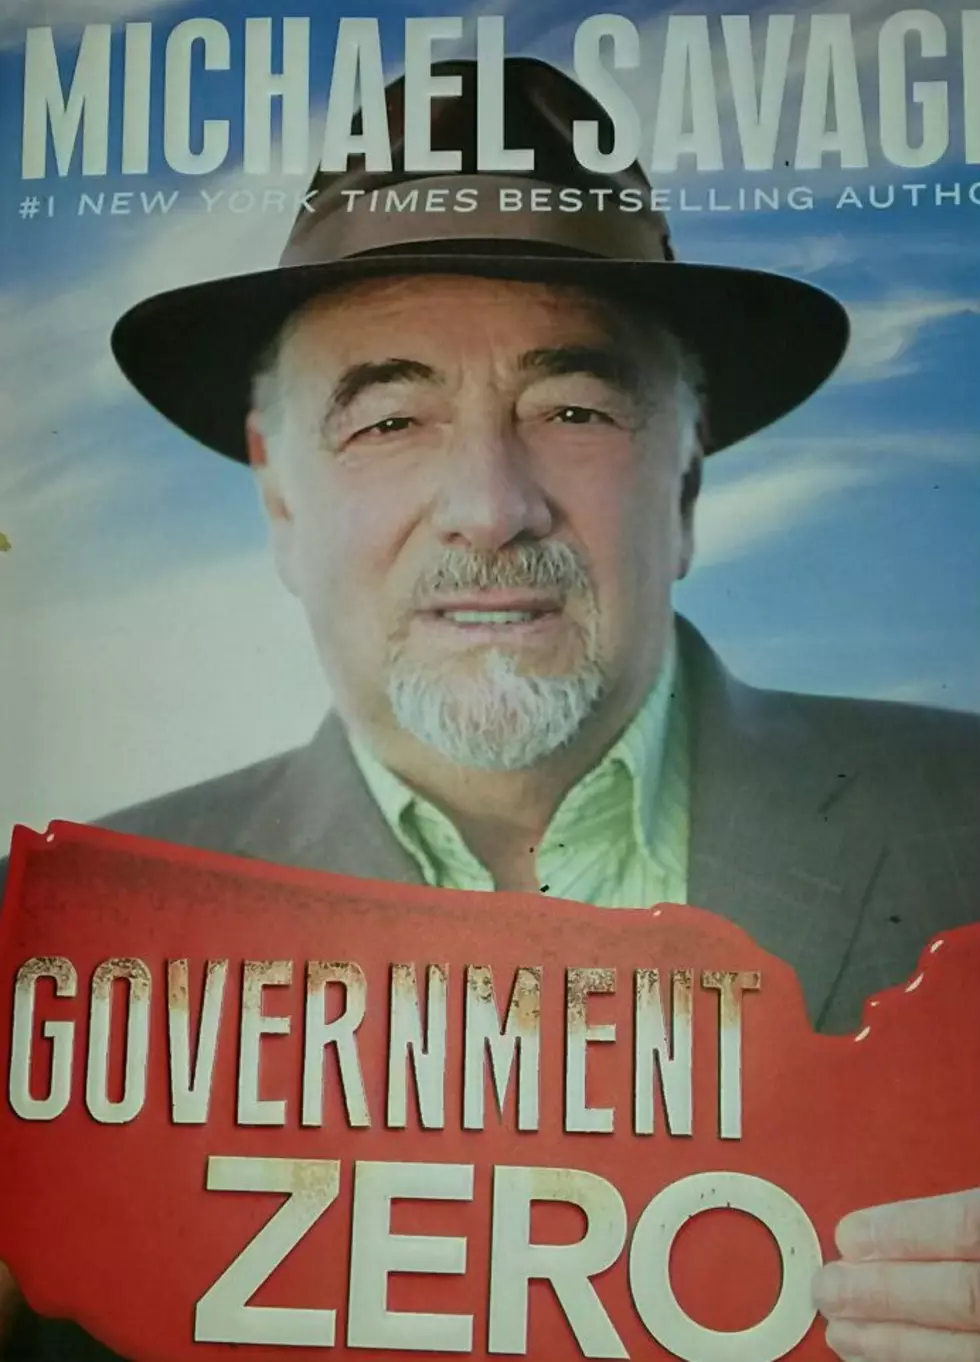 Win The New Best-Selling Book from Michael Savage, “Government Zero”